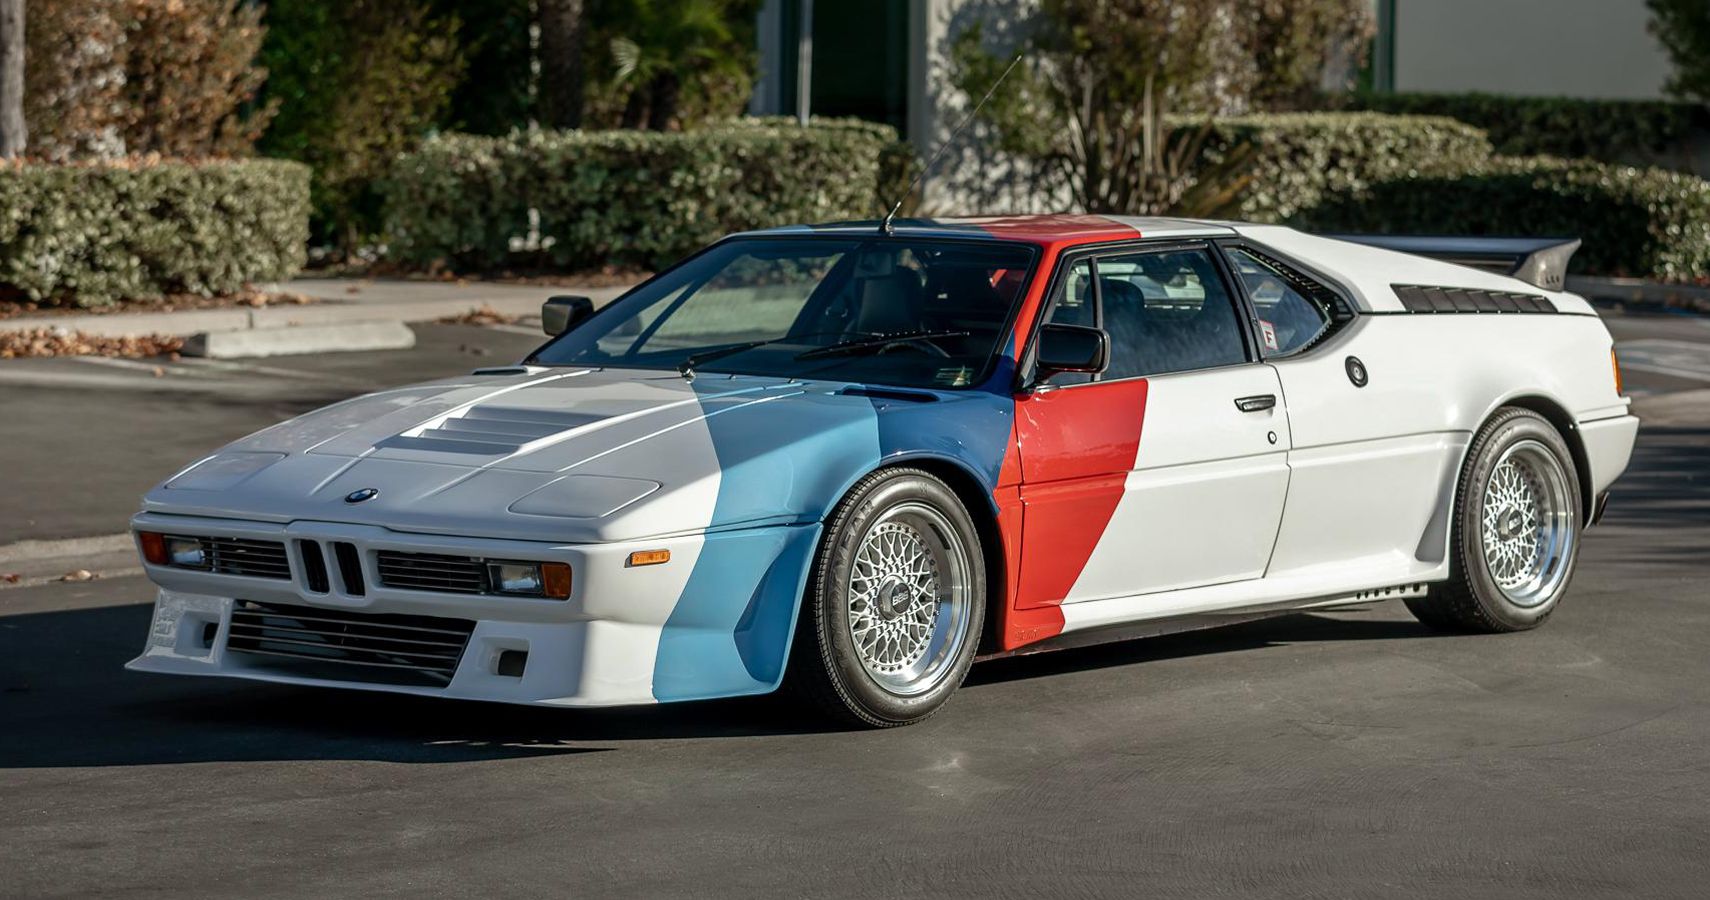 Extremely Rare Paul Walker's 1980 BMW M1 AHG Studie Classic Car